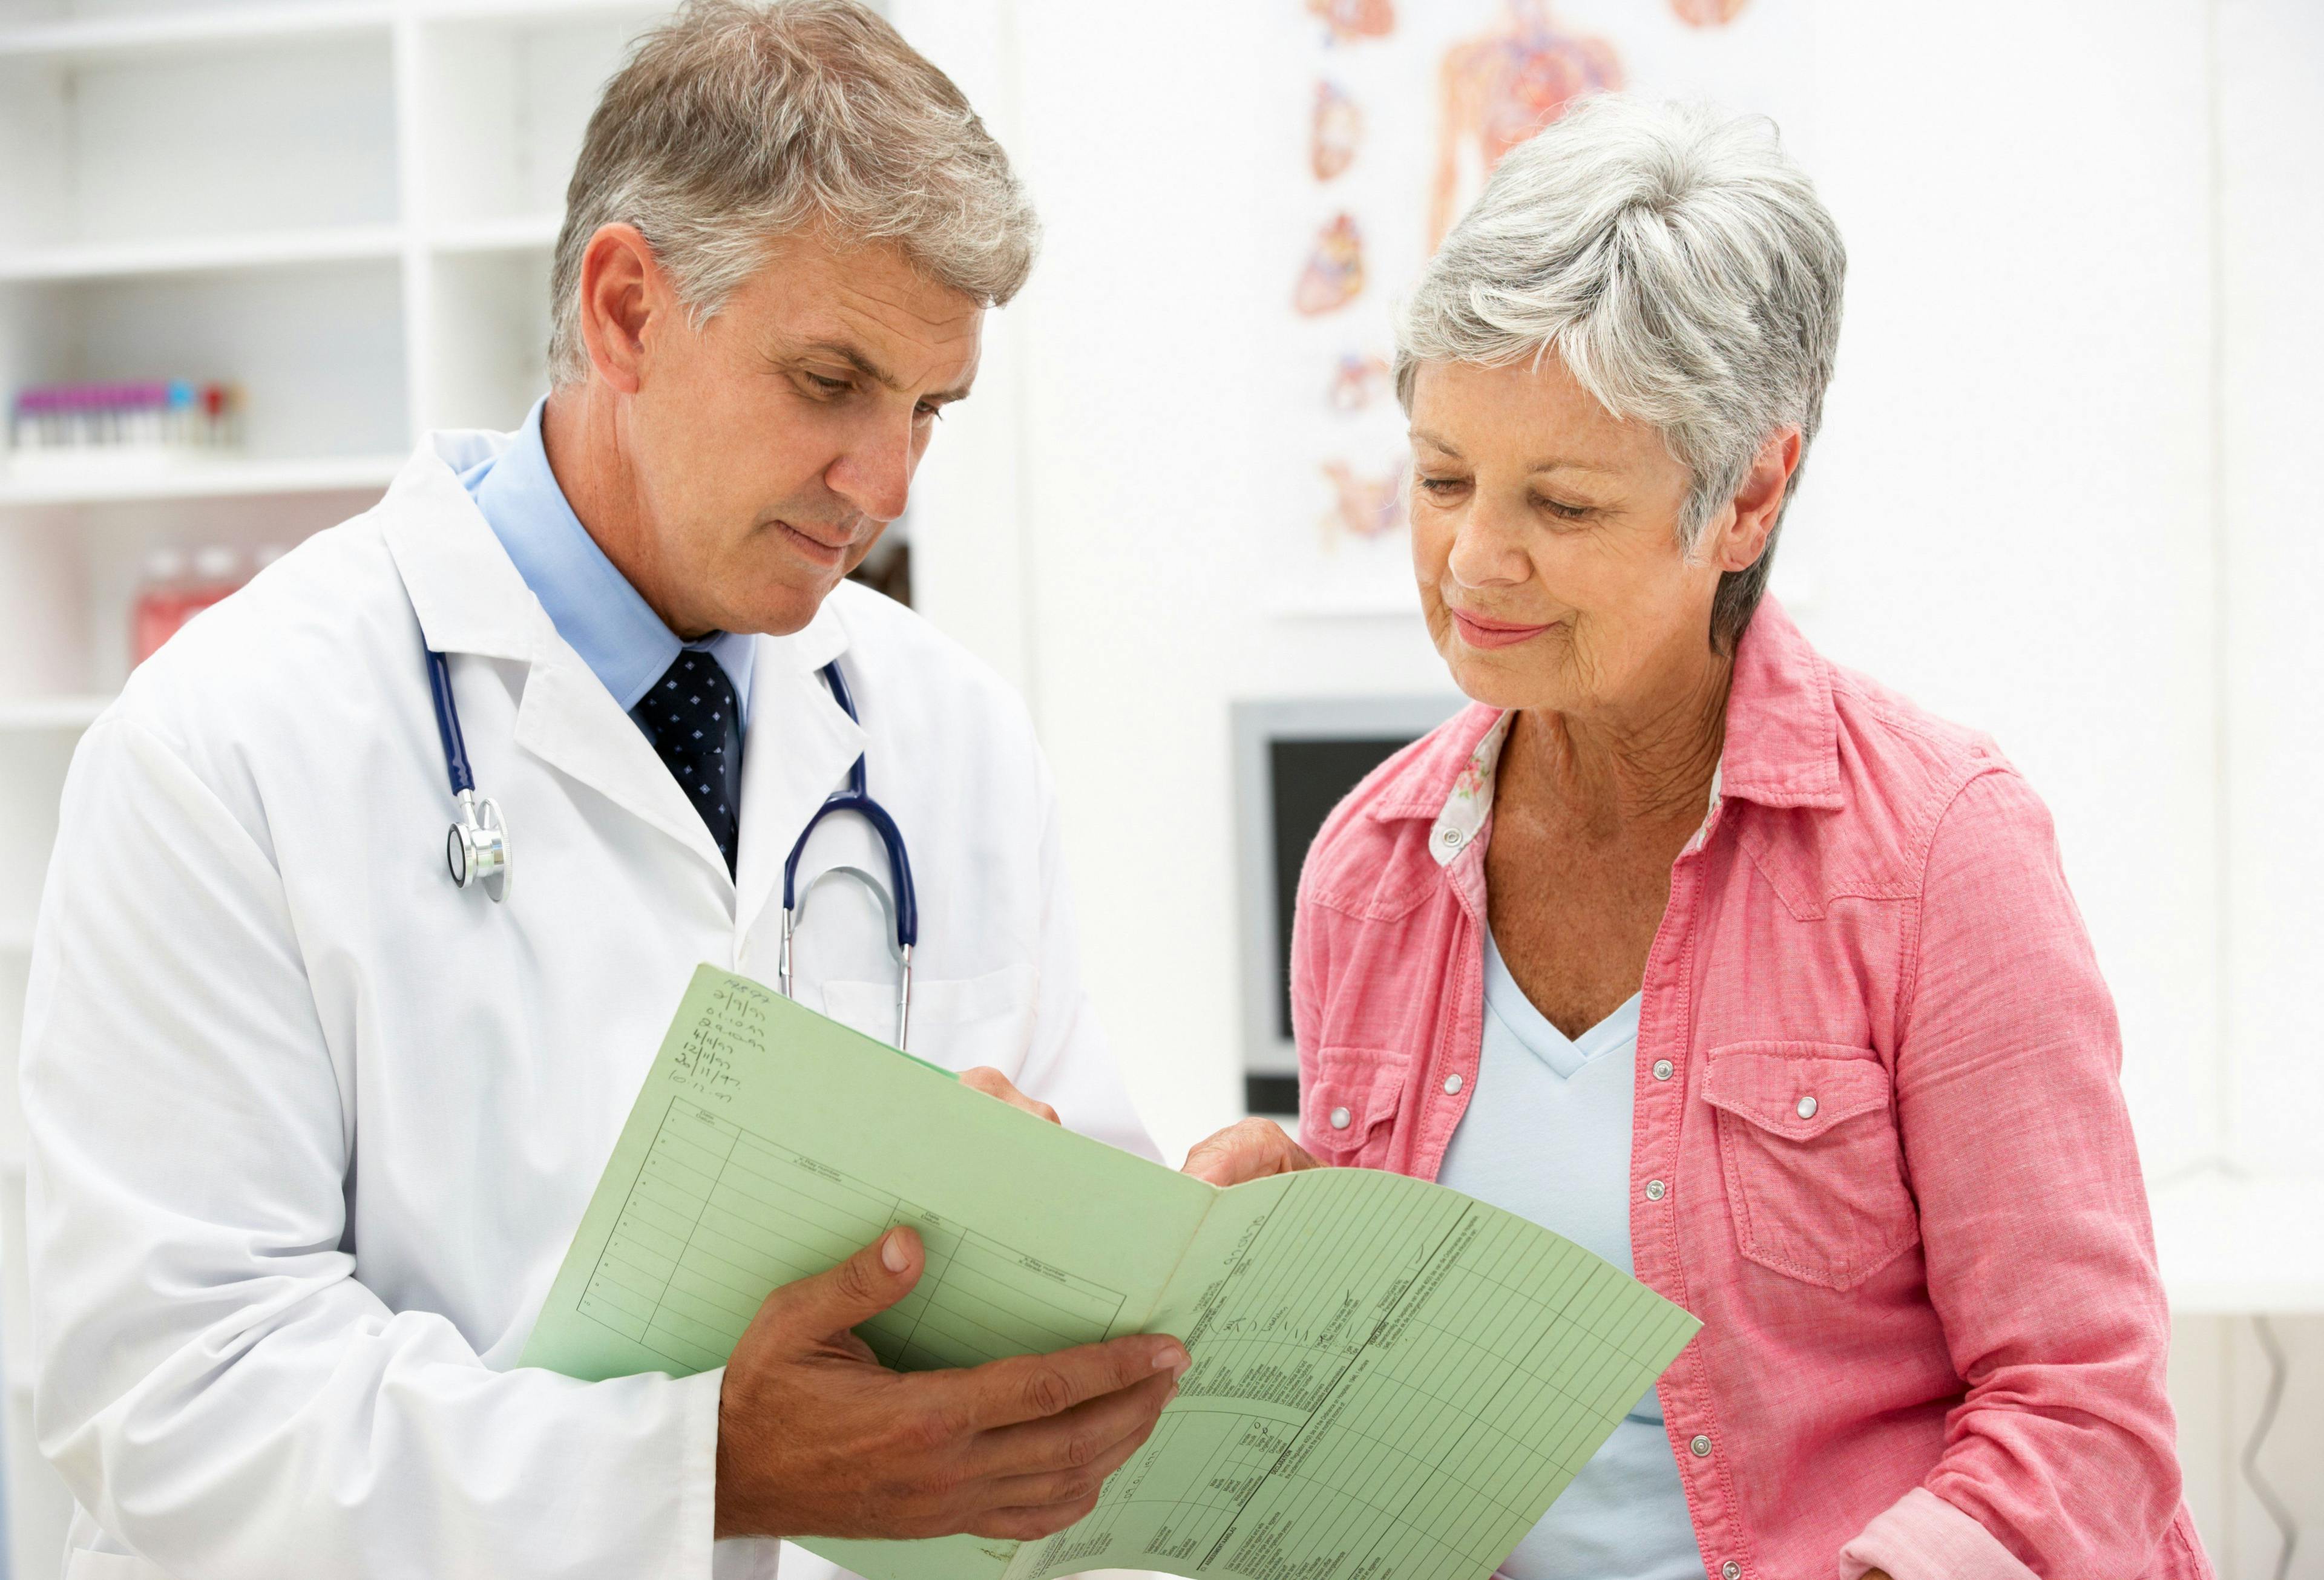 Doctor discussing treatment with patient | Credit: Fotolia